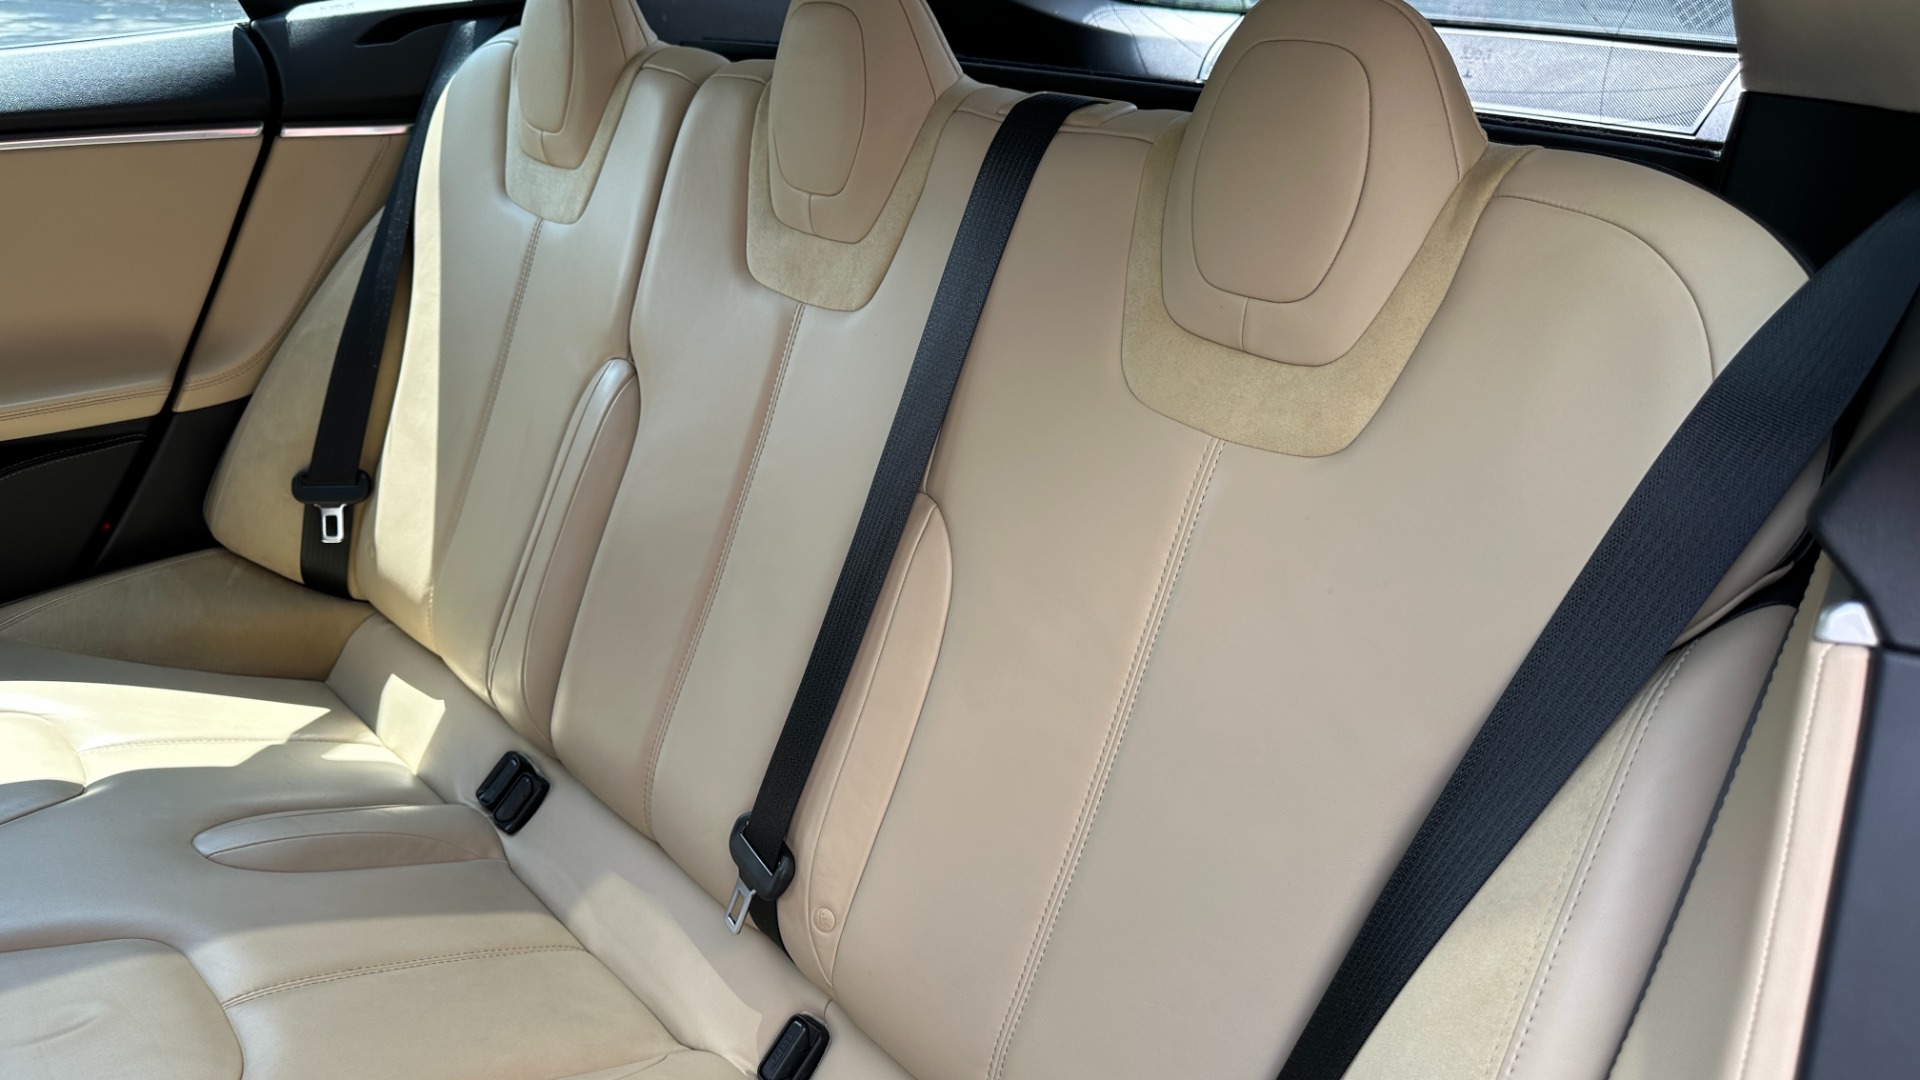 Used 2014 Tesla Model S 60 kWh Battery / 60D / PREMIUM CONNECTIVITY / LEATHER / SUNROOF for sale $22,995 at Formula Imports in Charlotte NC 28227 25